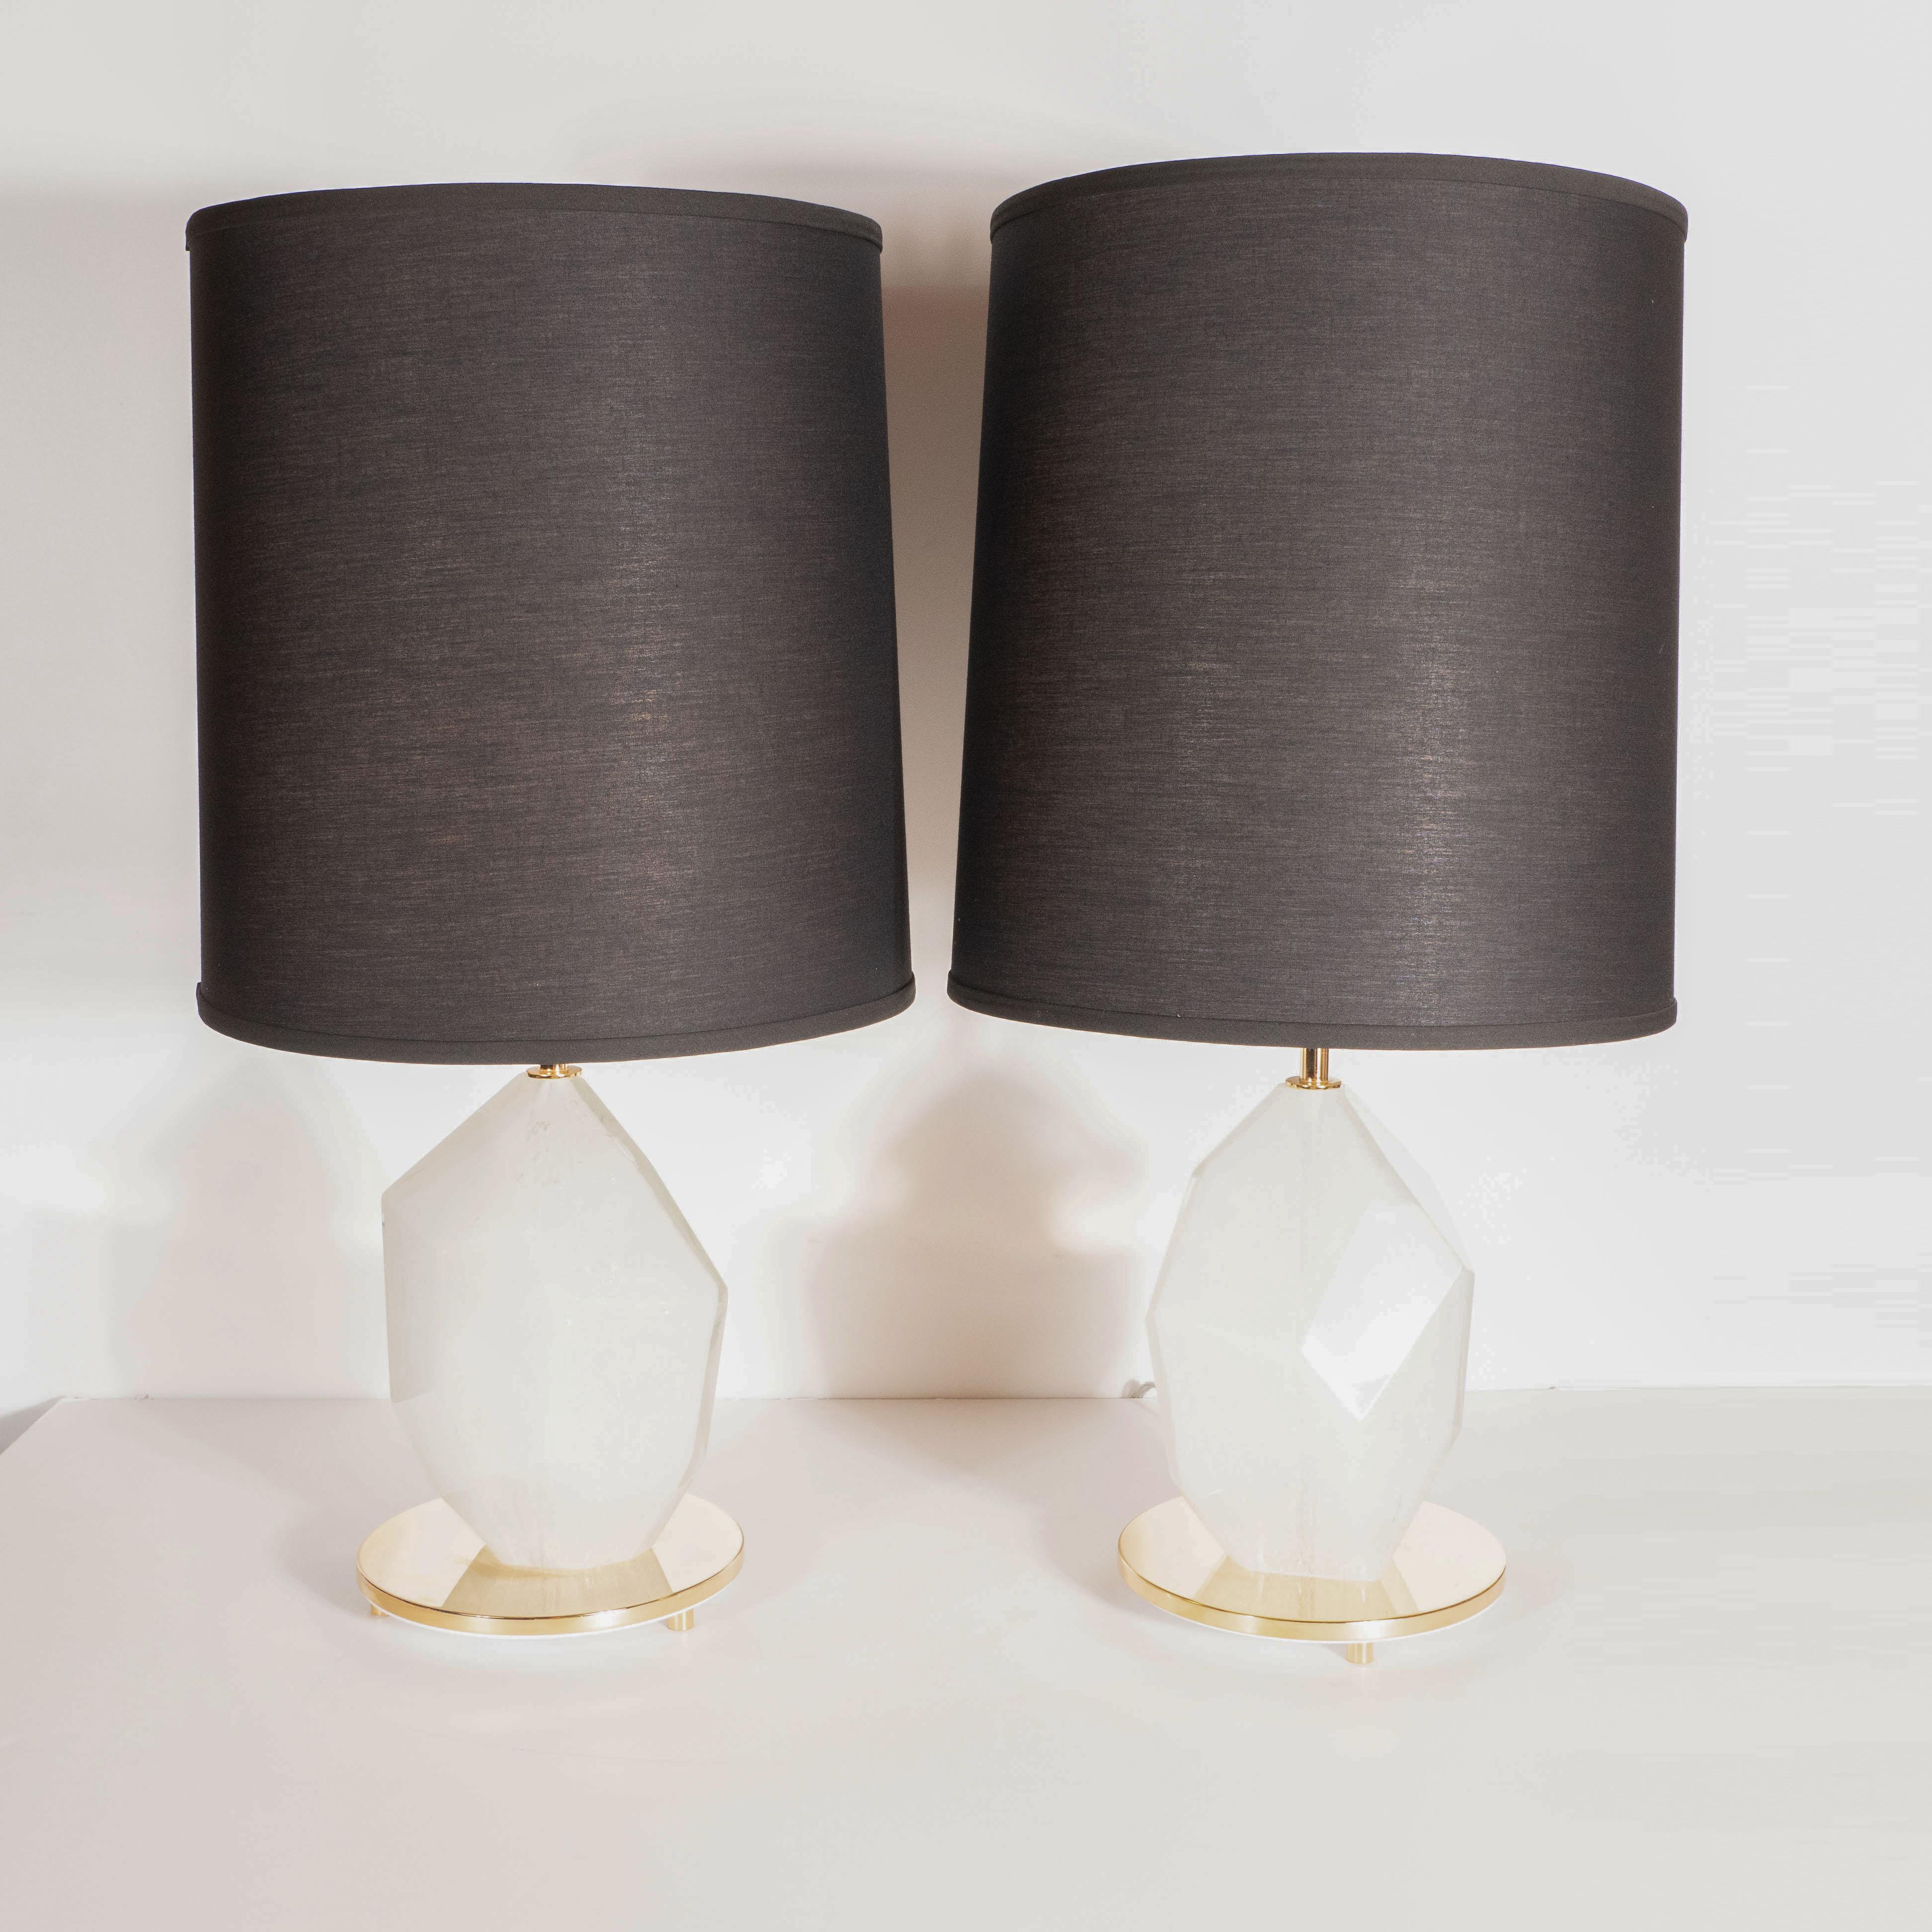 This stunning and dramatic pair of modernist table lamps were handblown in Murano, Italy- the islands off the coast of Venice renowned for centuries for their superlative glass production. They offer faceted white glass bodies- resembling exquisite